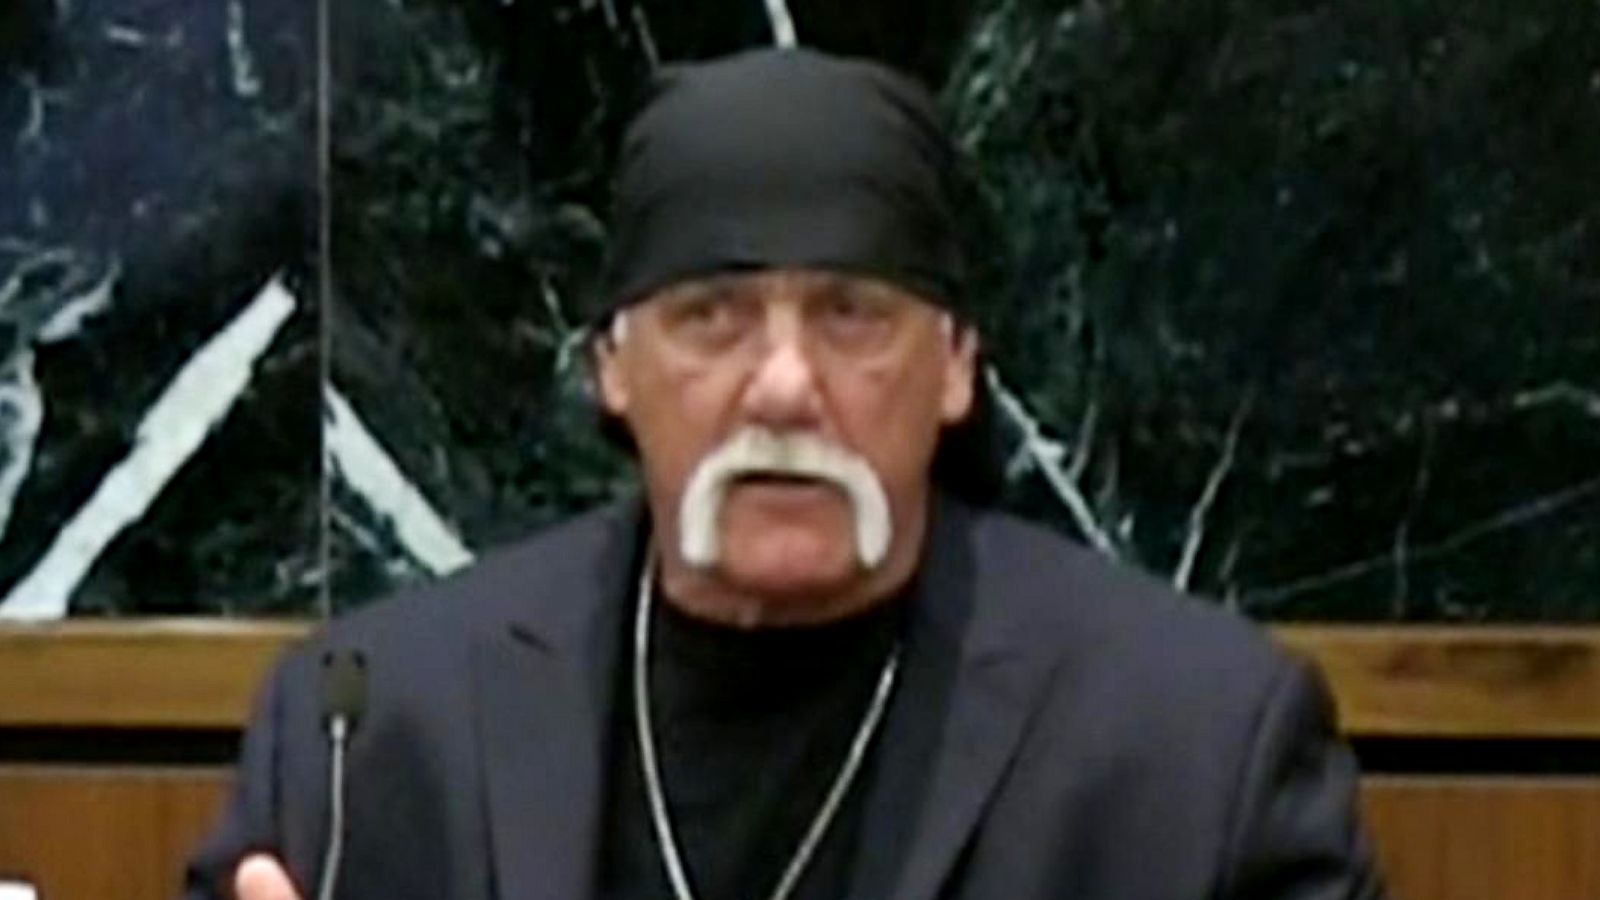 Hulk Hogans Personal Life Discussed During Sex Tape Testimony